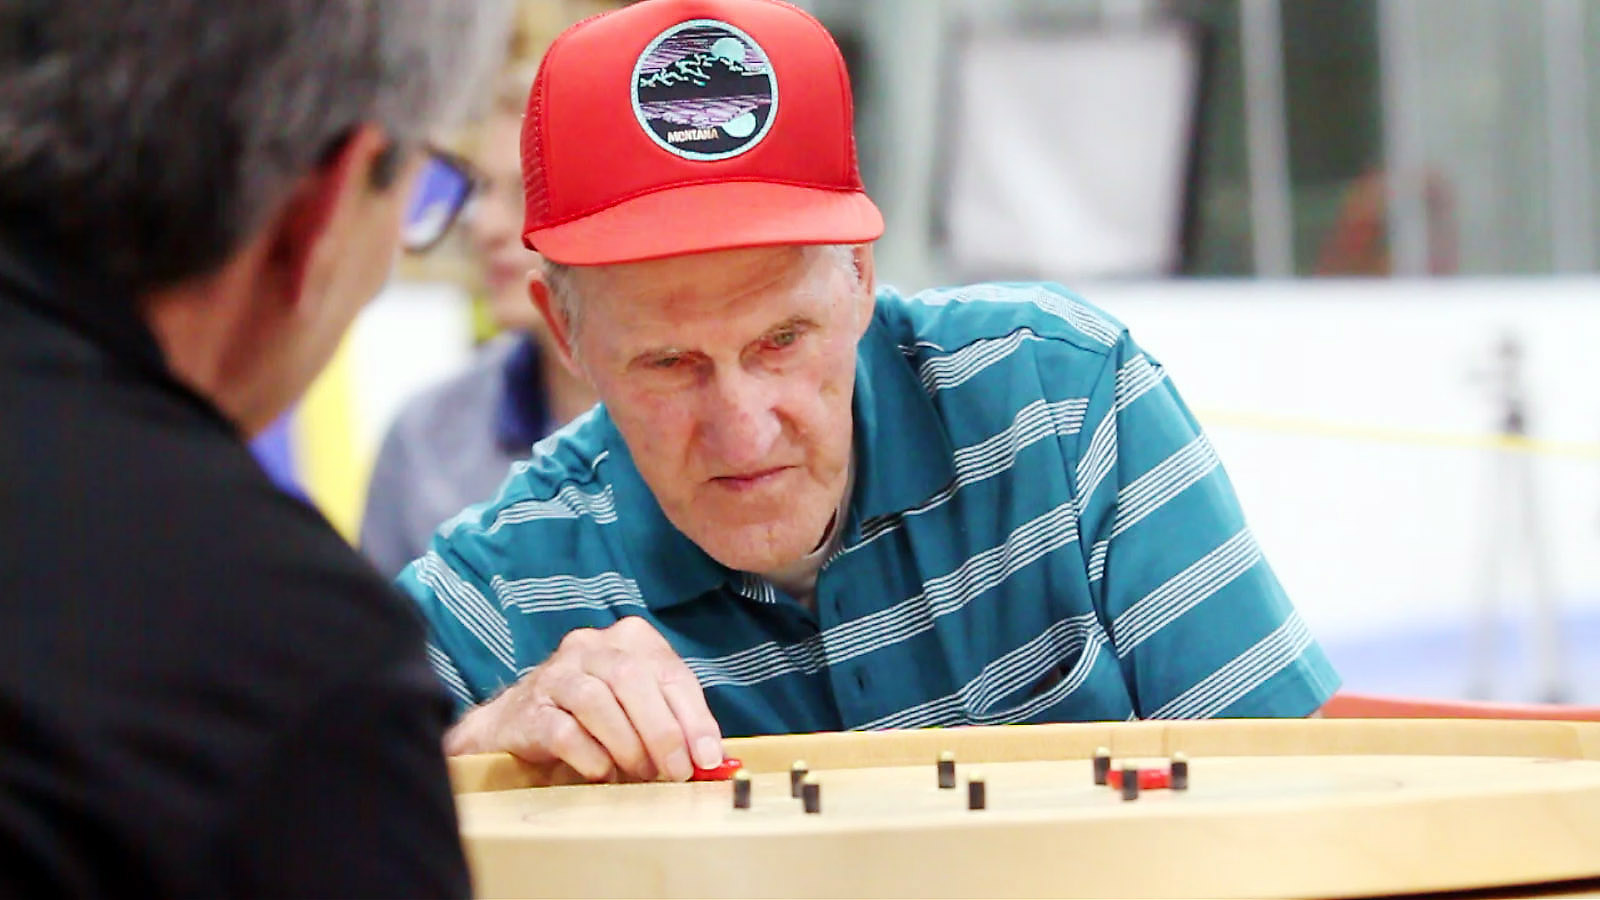 Robert Bonnett takes a shot during the final match on his way to the 2017 World Crokinole Championship. Photo Credit: Bill Gladding